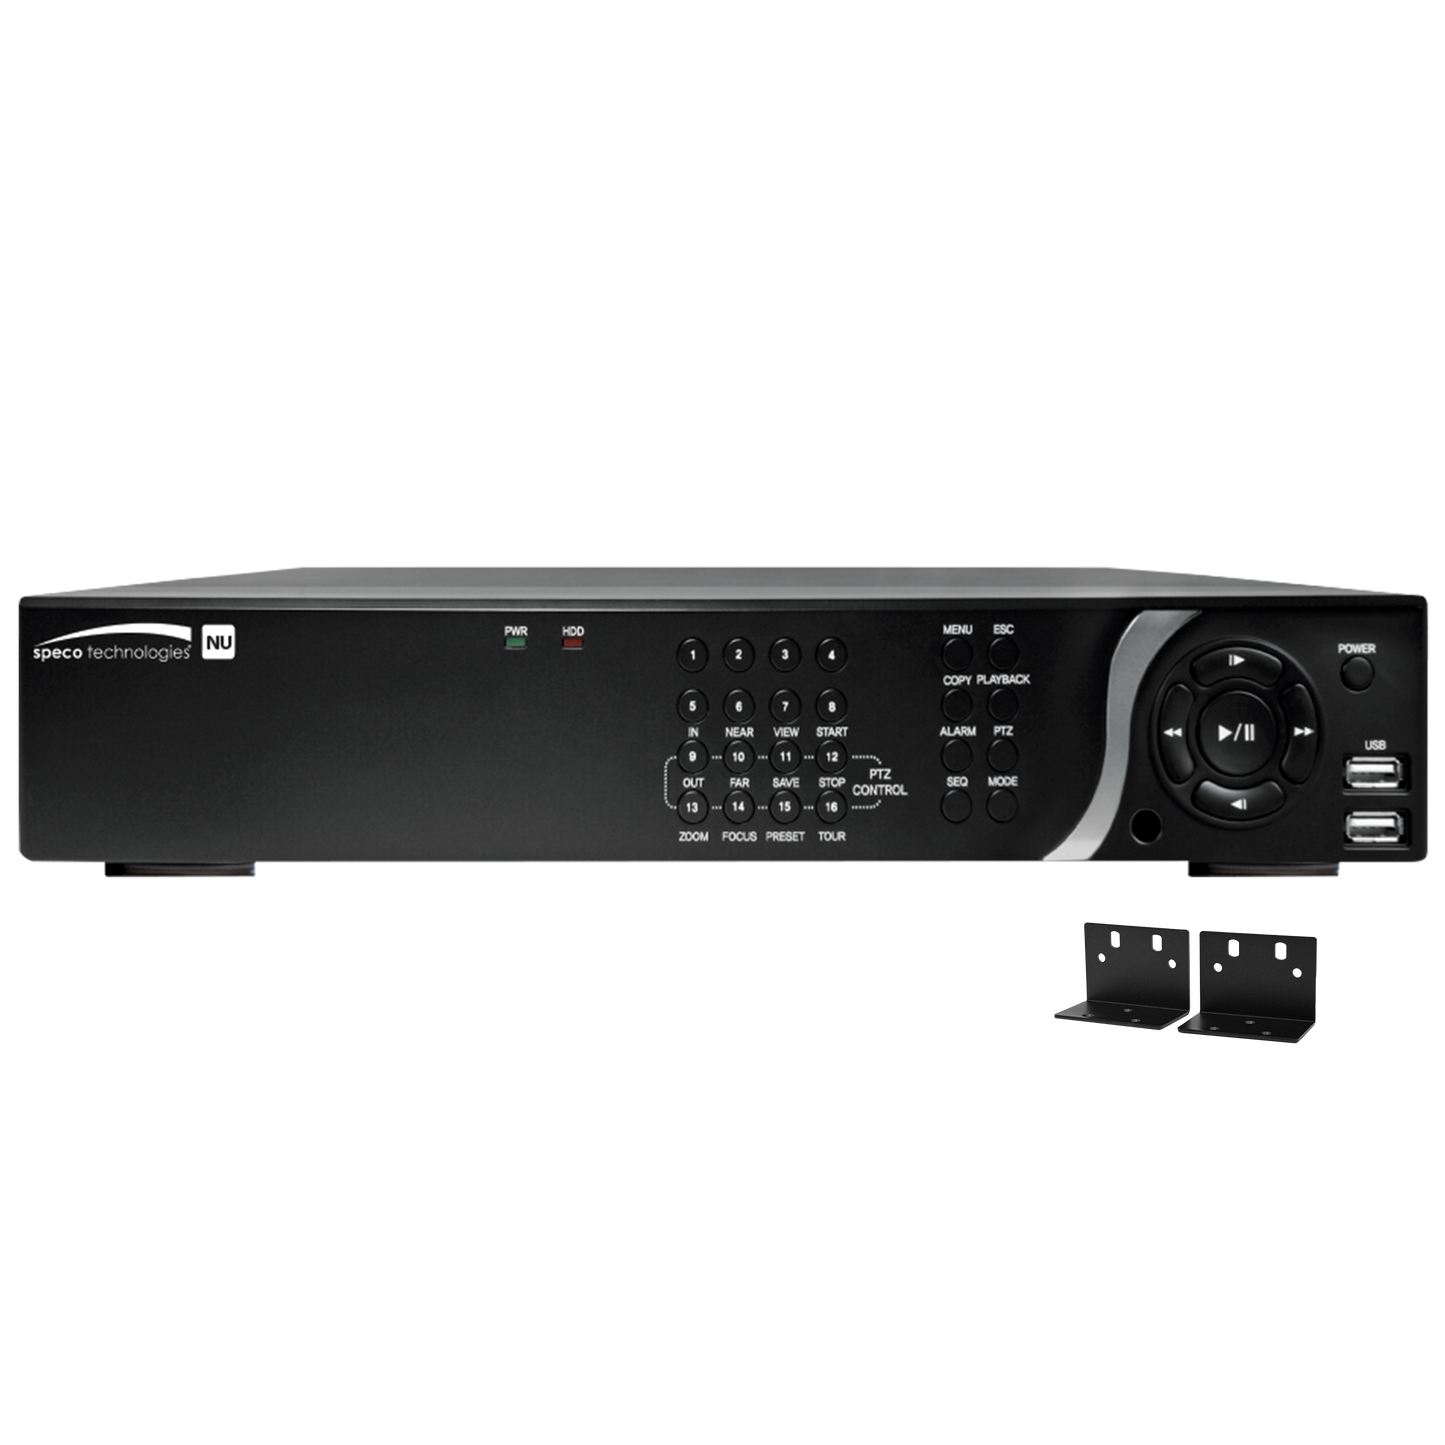 16 Channel Network Server with 16 Built-in PoE+ Ports, H.265, 4K